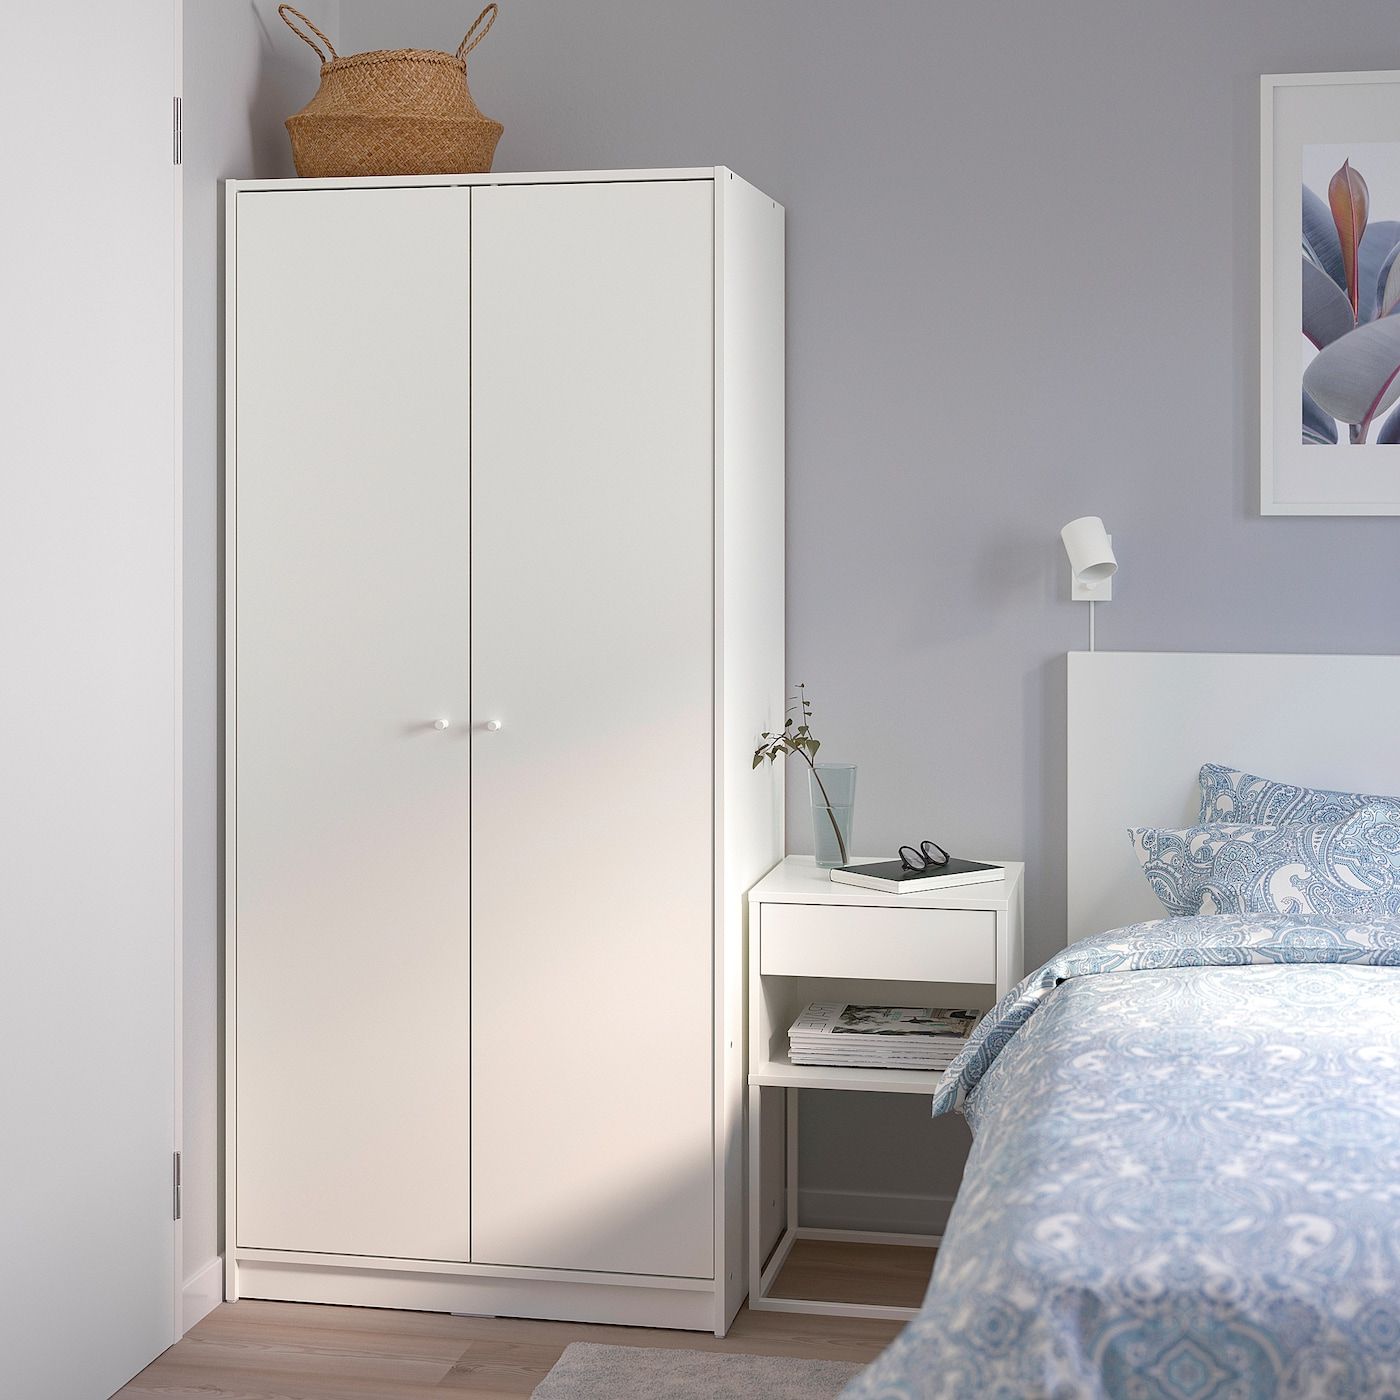 Kleppstad Wardrobe With 2 Doors, White, 311/4x691/4" – Ikea Within Two Door White Wardrobes (Gallery 2 of 20)